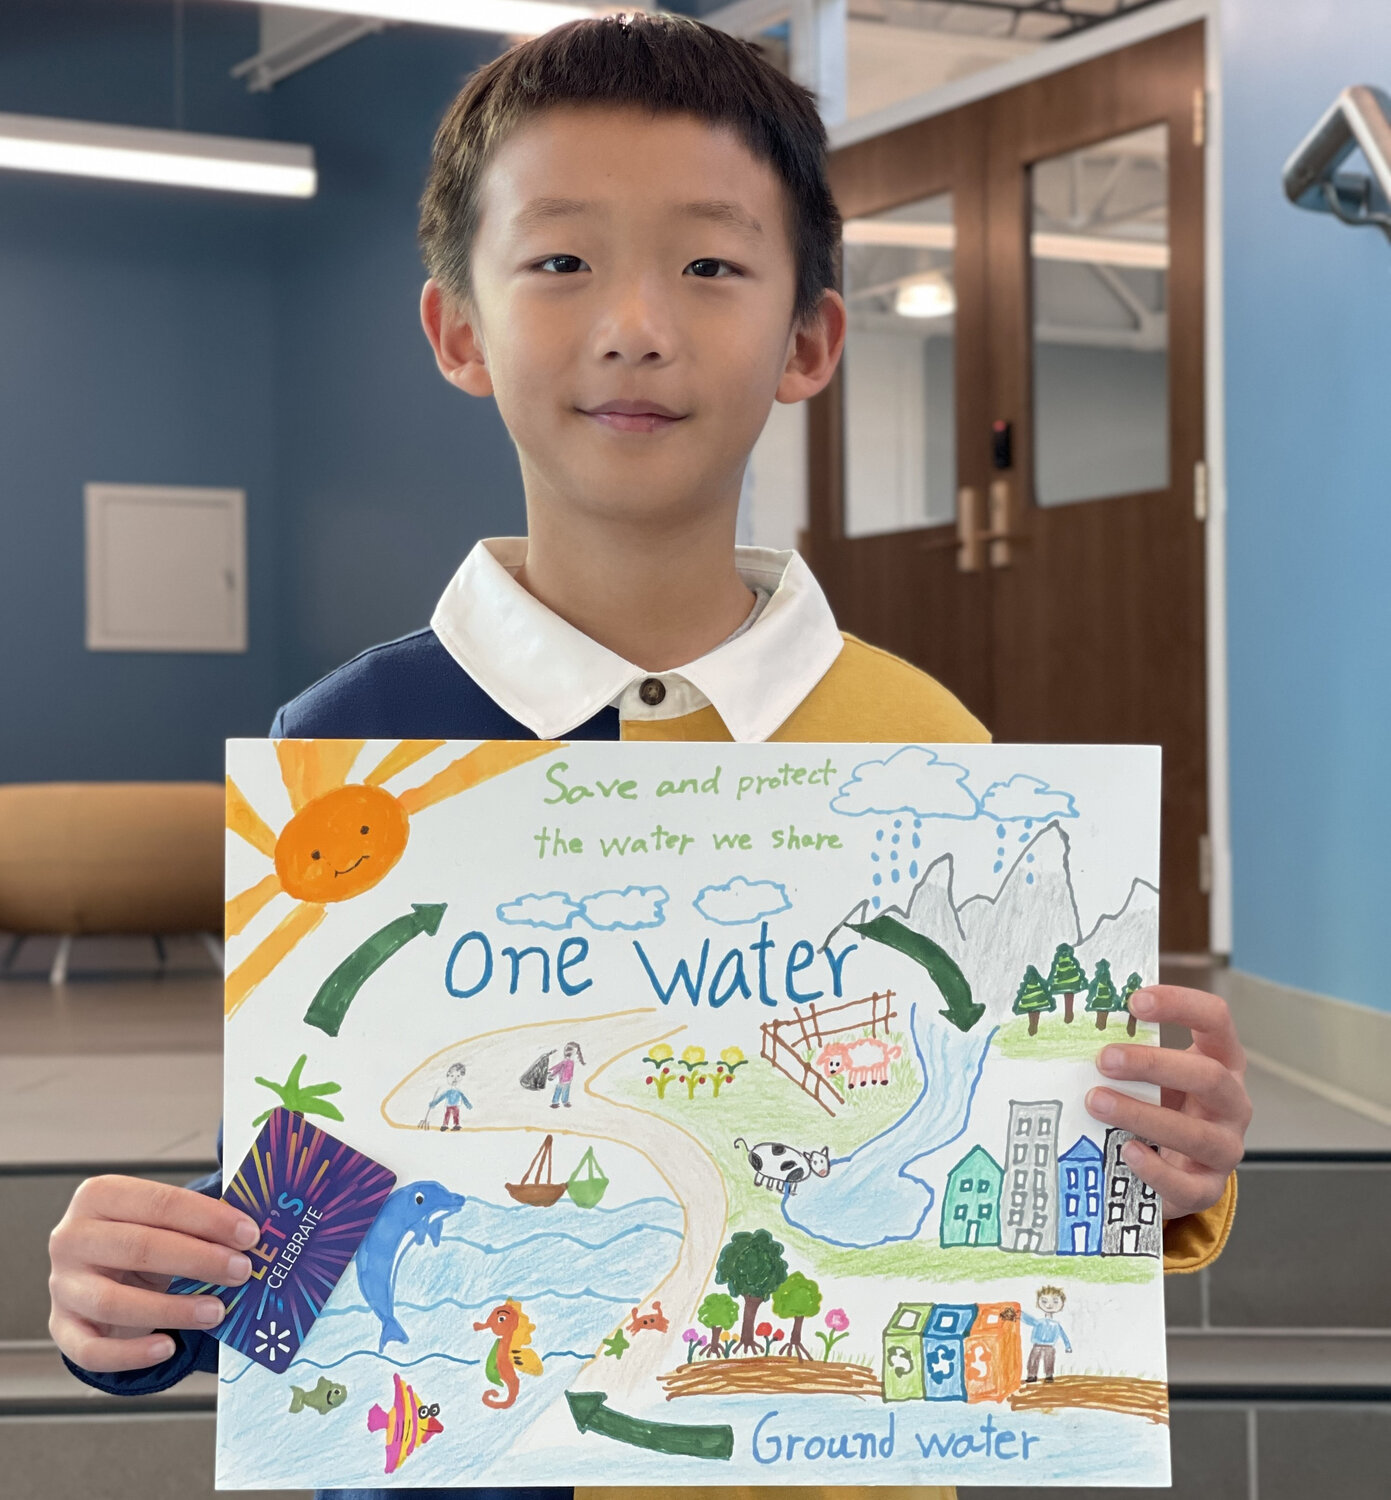 Victor Zhou, a third grader at Lewes Elementary, placed first in grade category 2-3 in the 2023 Sussex County Conservation Poster Contest.